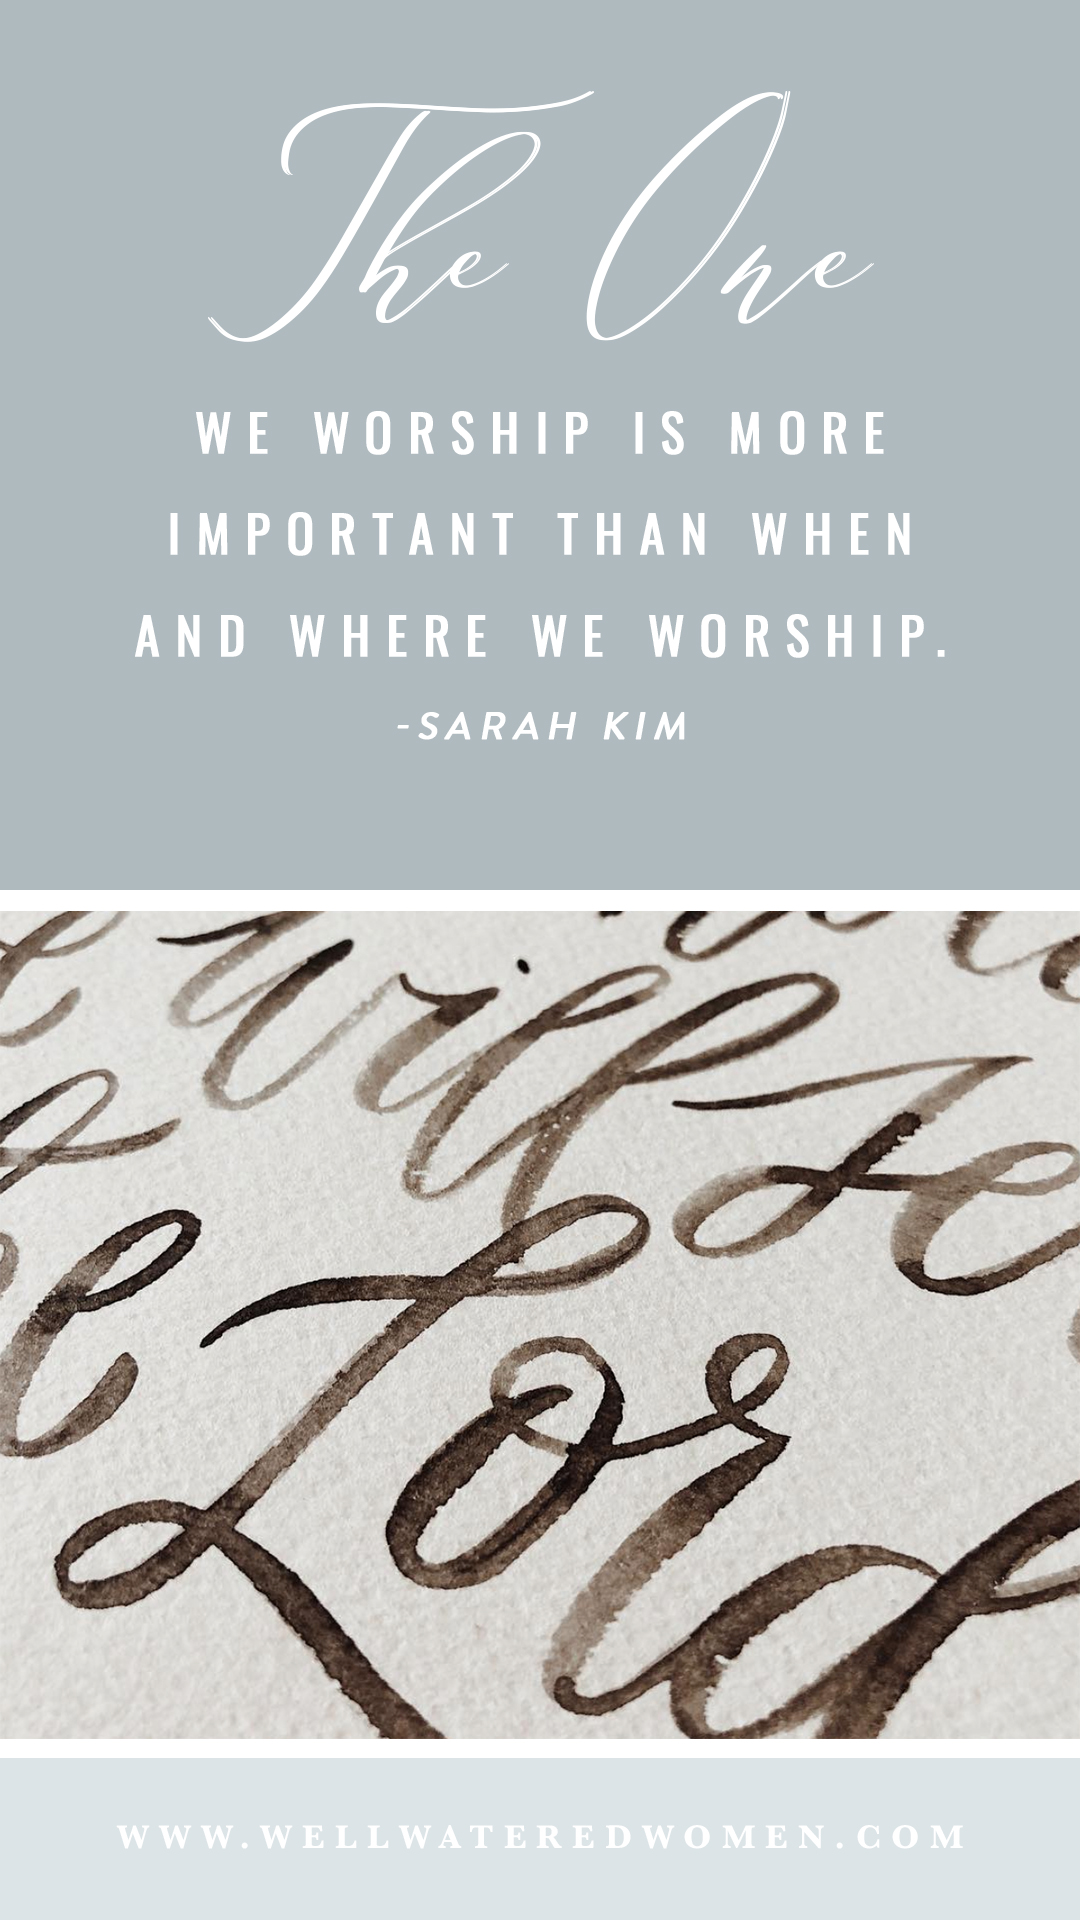 Biblical Lockscreen - Worshiping God day in and day out starts with the Word of God. The One we worship is more important than when and where we worship.